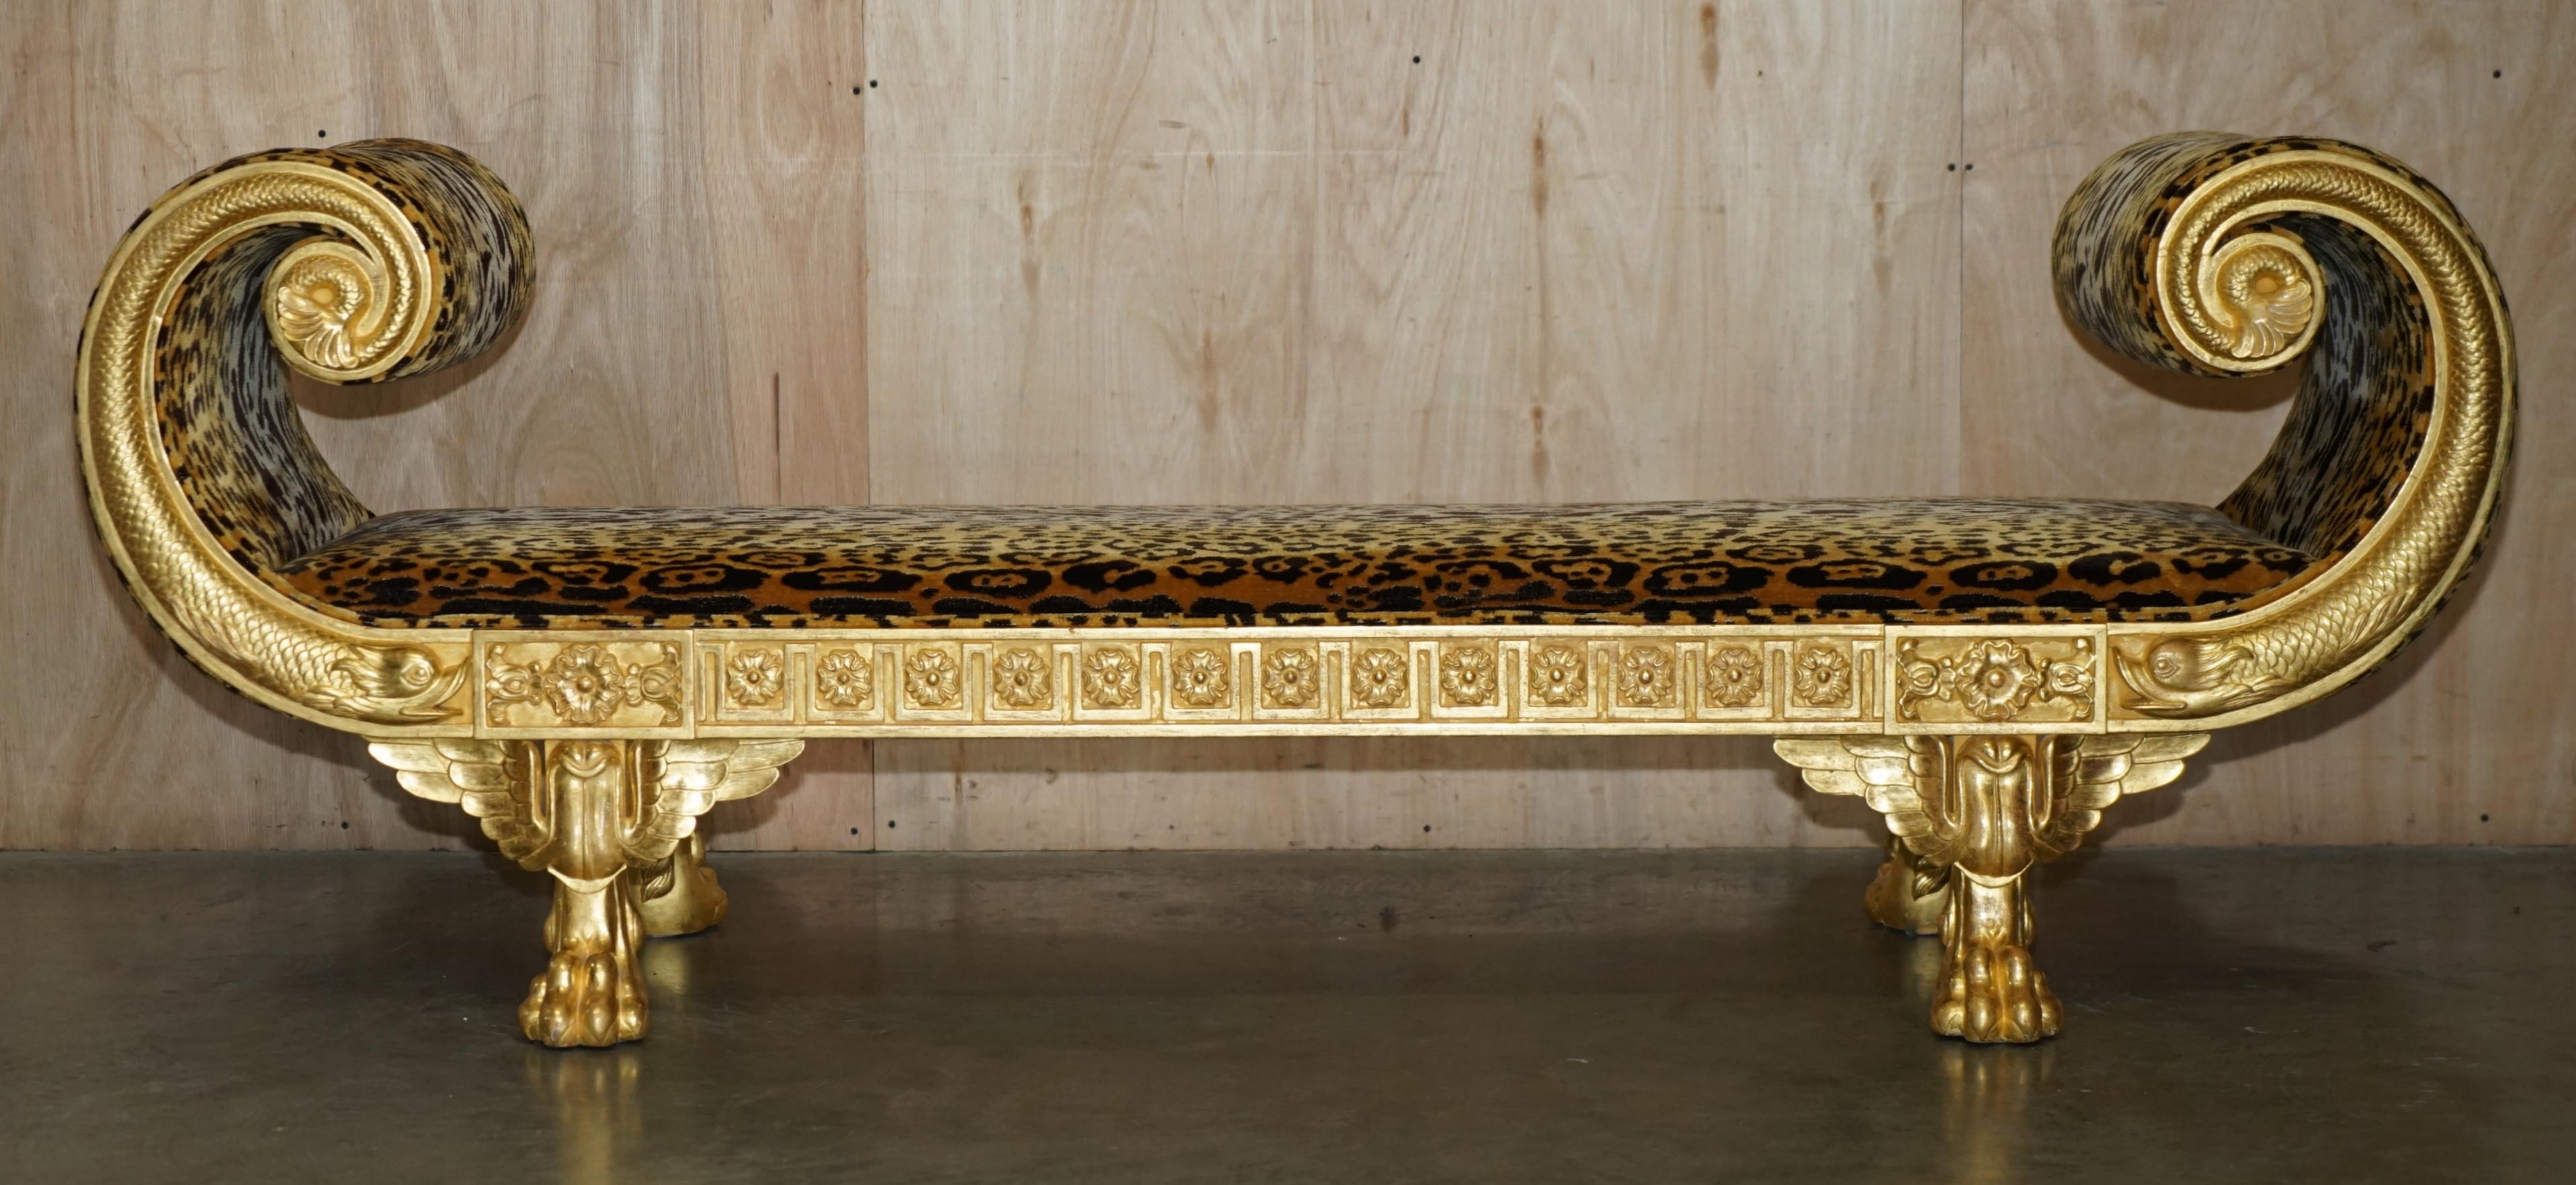 Royal House Antiques

Royal House Antiques is delighted to offer for sale this absolutely stunning RRP £18,000 extra large twin serpent gold guilt with hand carved frame Pavillion Daybed finished in Leopard print fabric

Please note the delivery fee